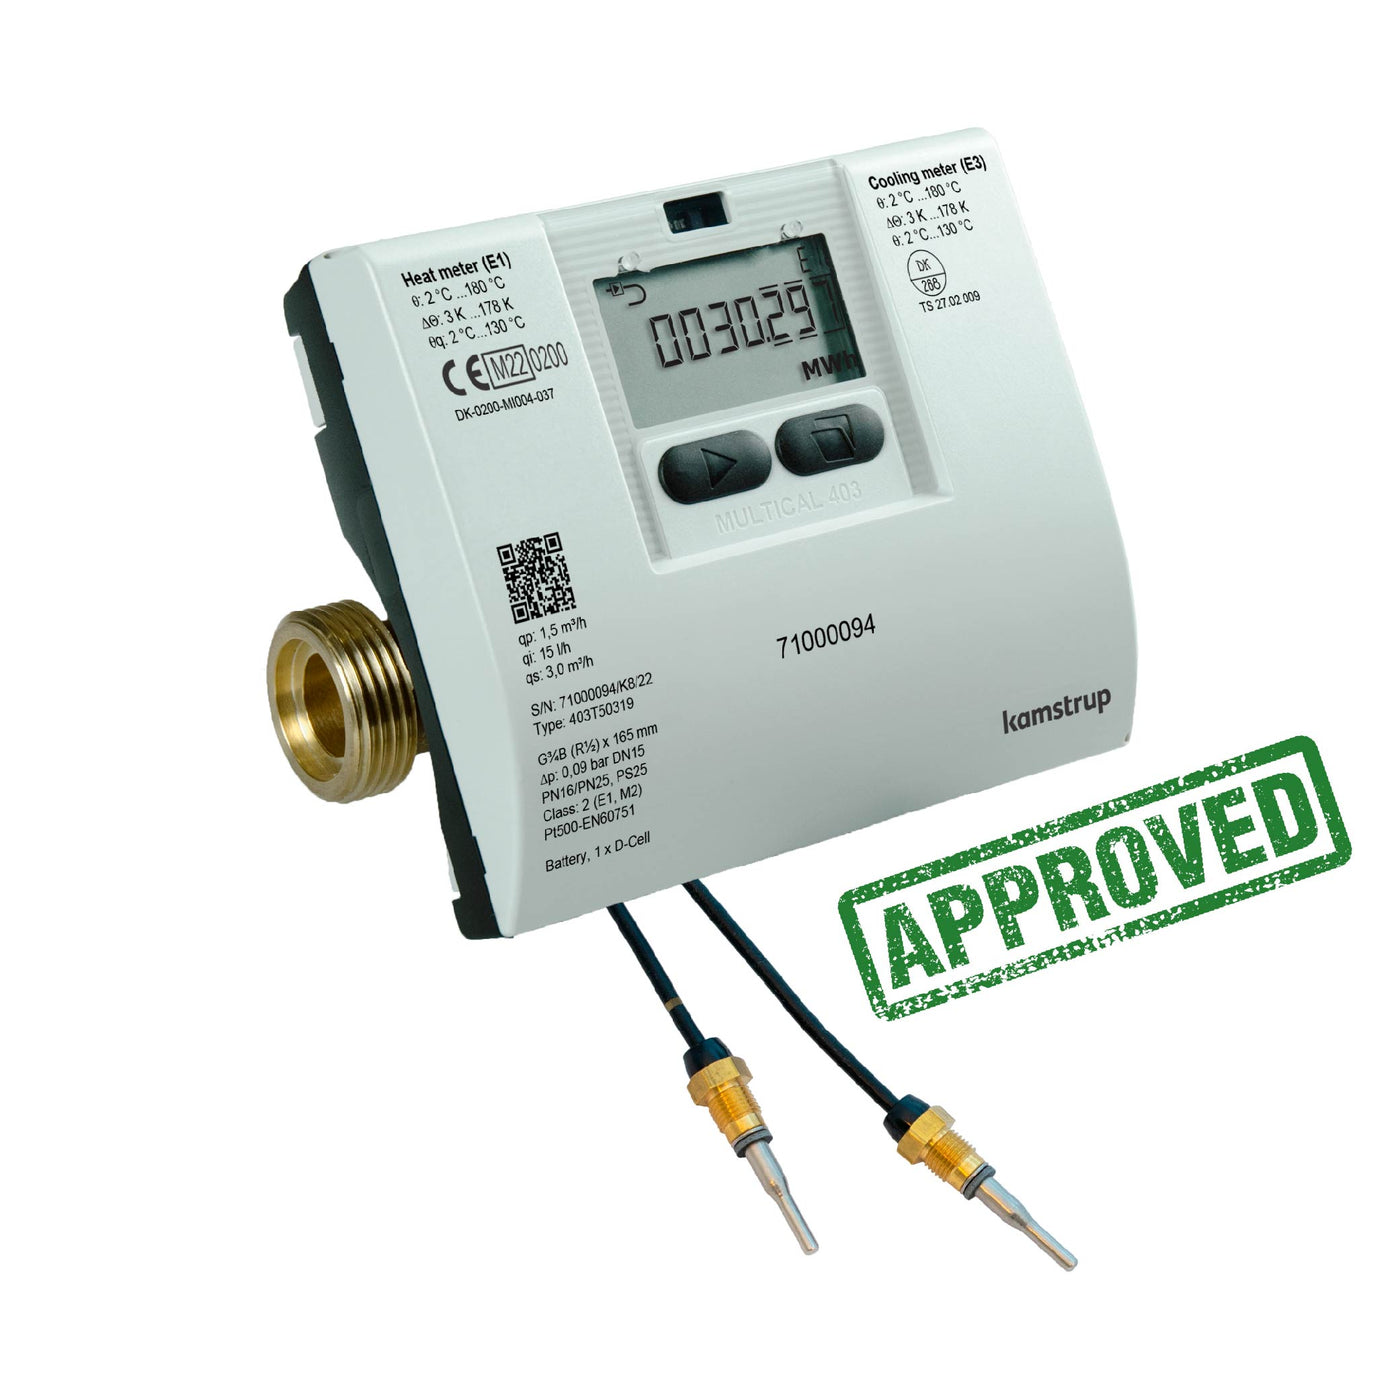 Are you selecting an MID approved heat meter?